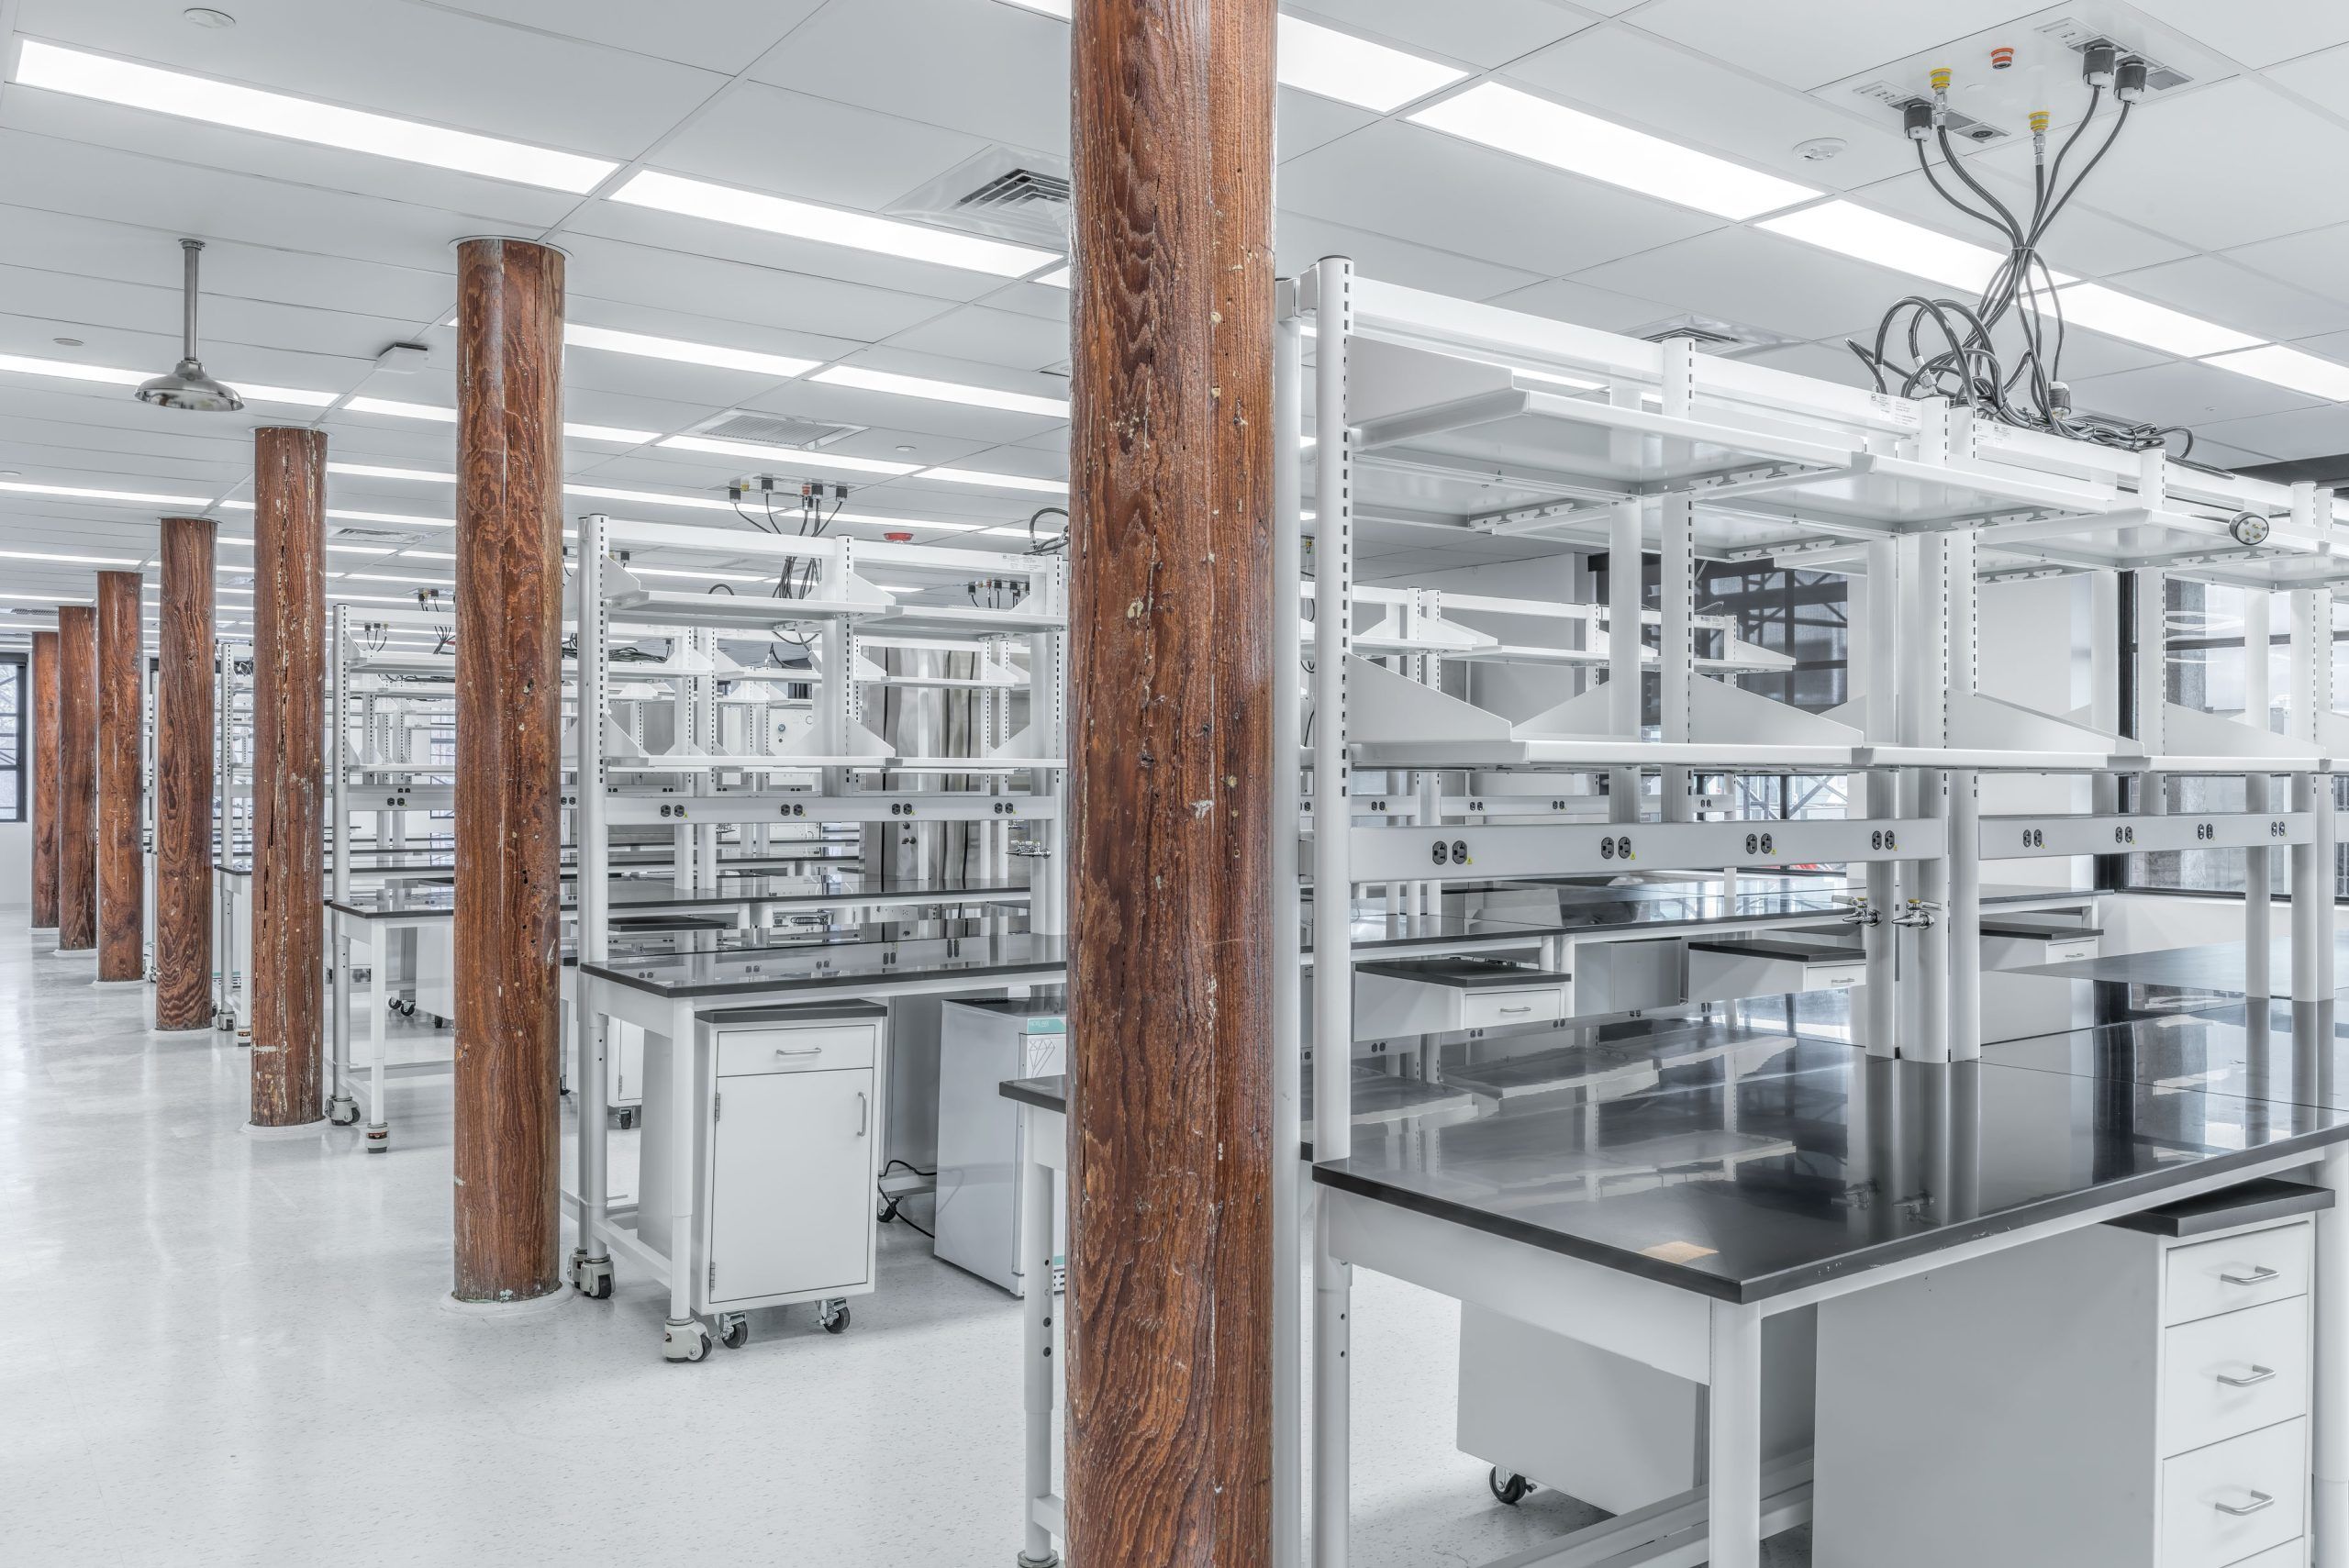 TIMING IS EVERYTHING: Wise Construction Completes Be Biopharma’s Newest Facility in Cambridge, MA